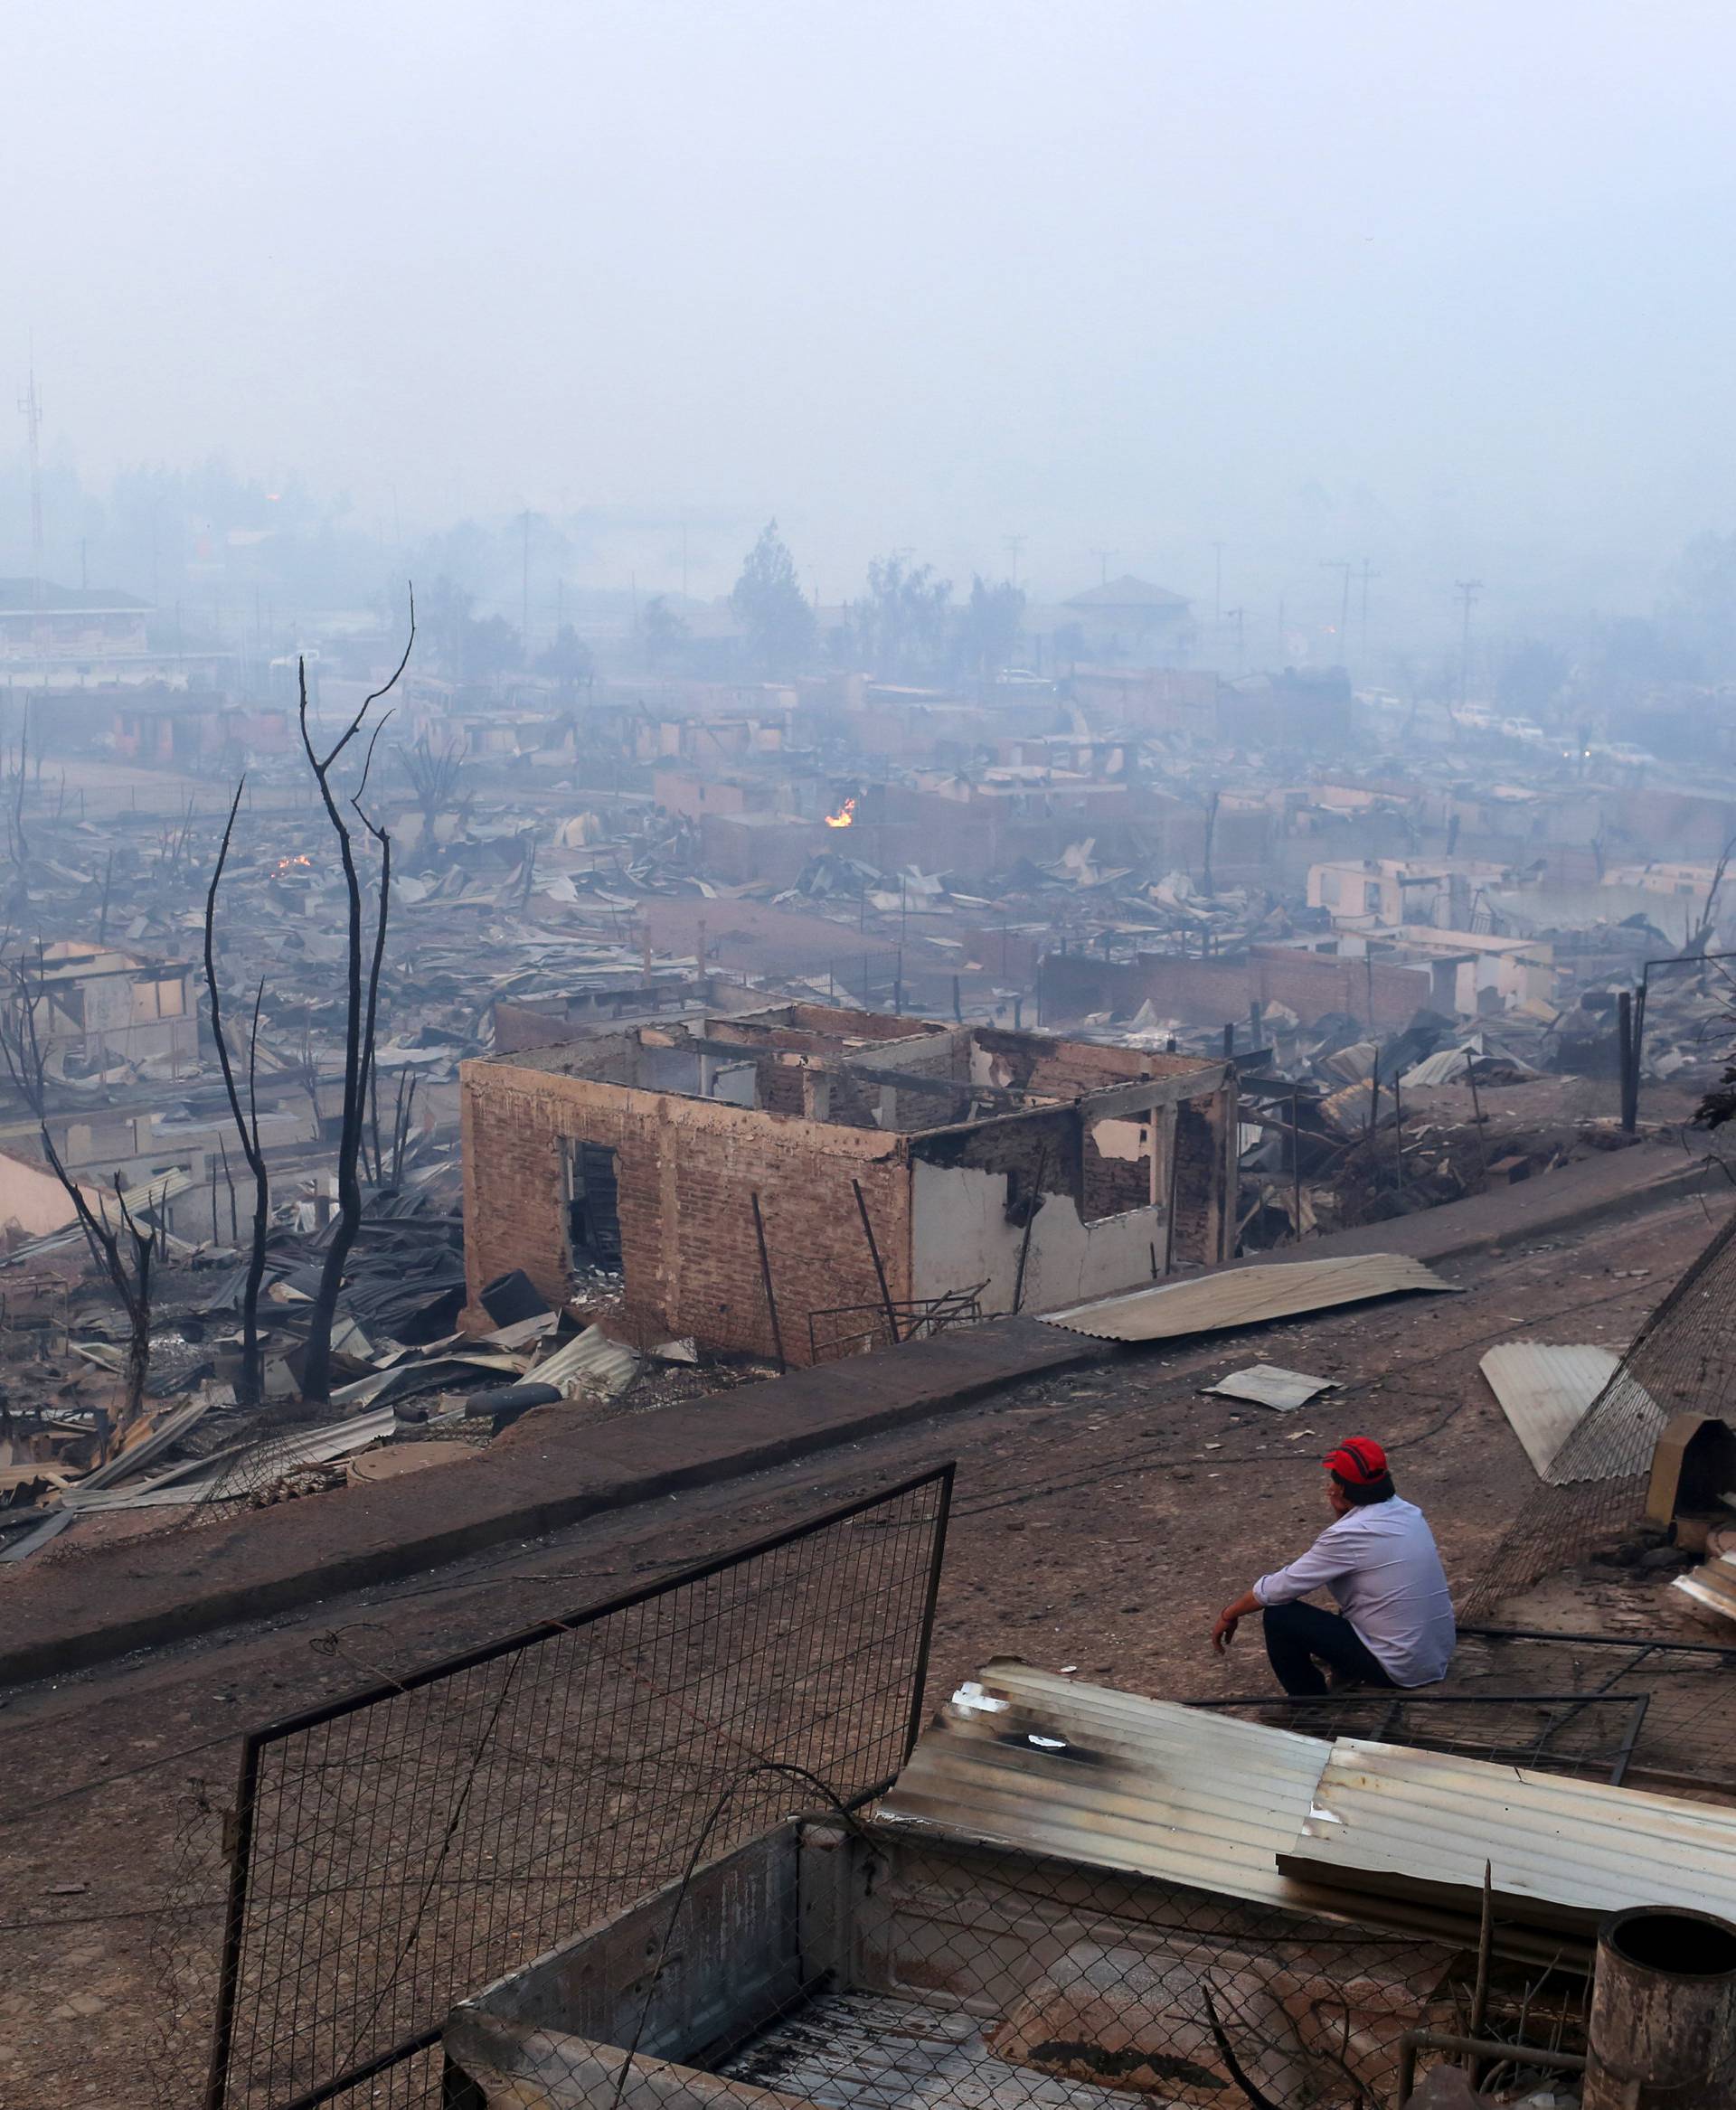 A man sits next to the remains of burnt houses as the worst wildfires in Chile's modern history ravage wide swaths of the country's central-south regions, in Santa Olga